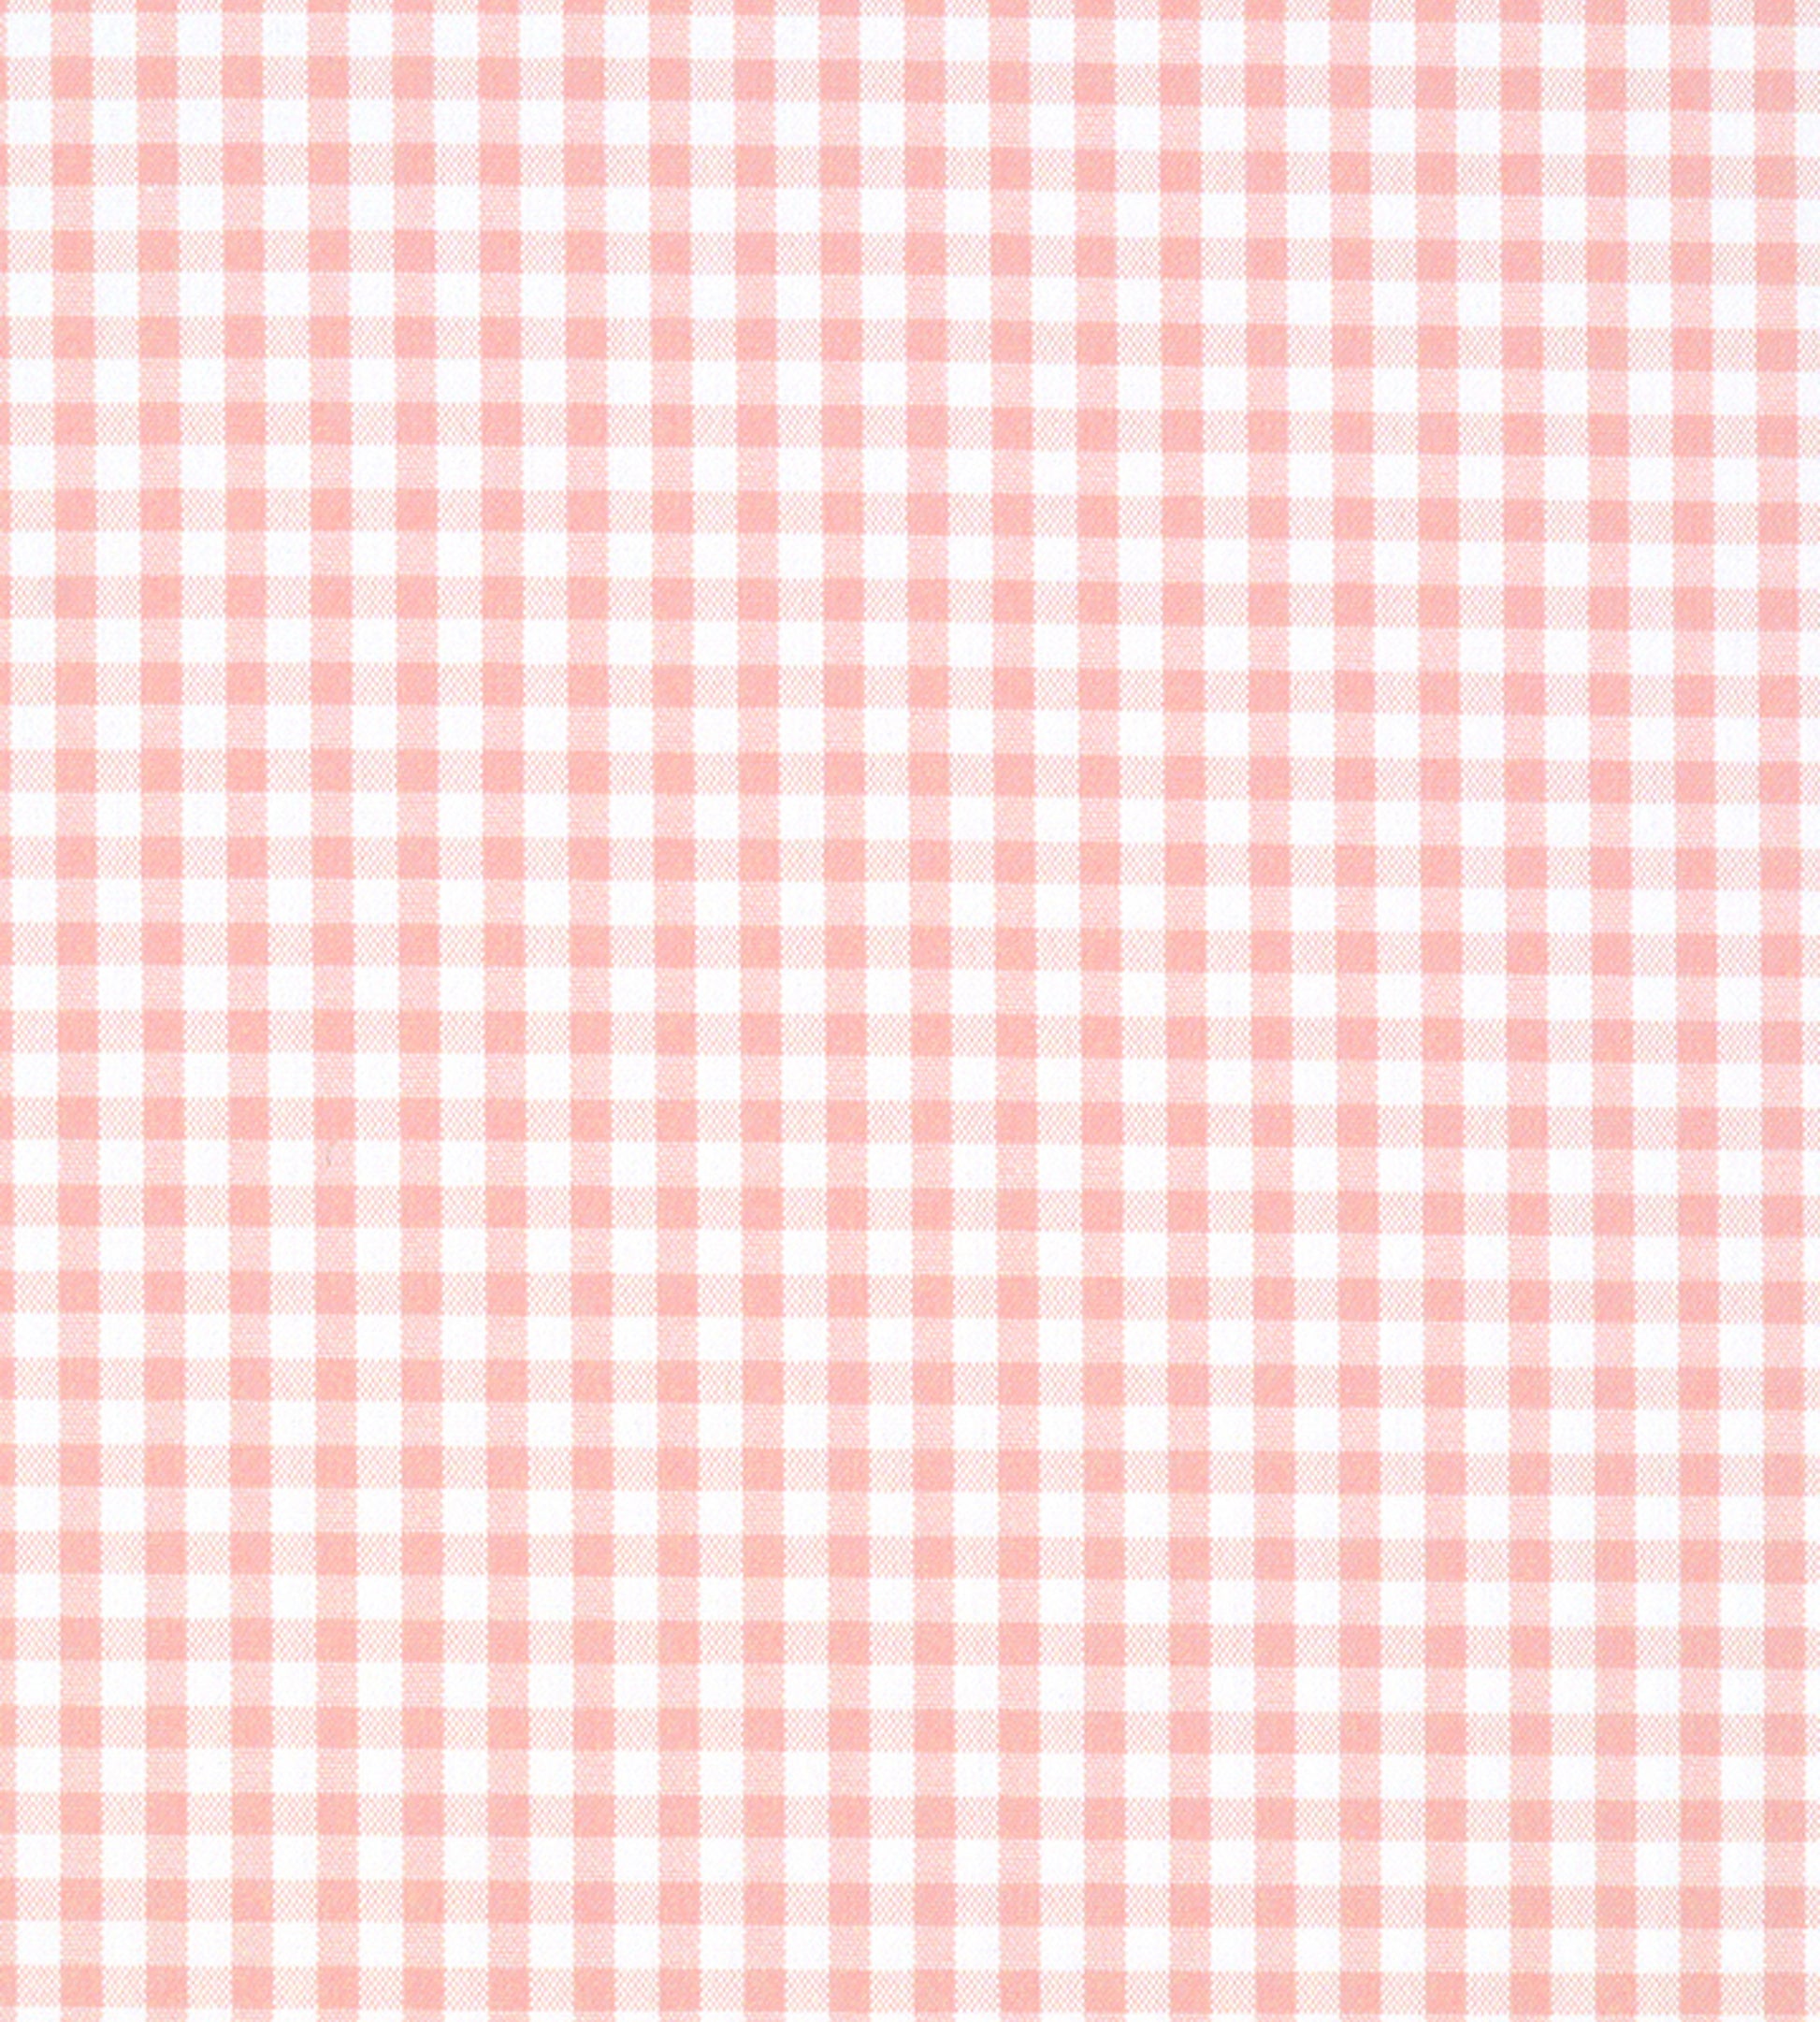 Purchase Old World Weavers Fabric Item# F3 00073018, Poker Check Pink 1